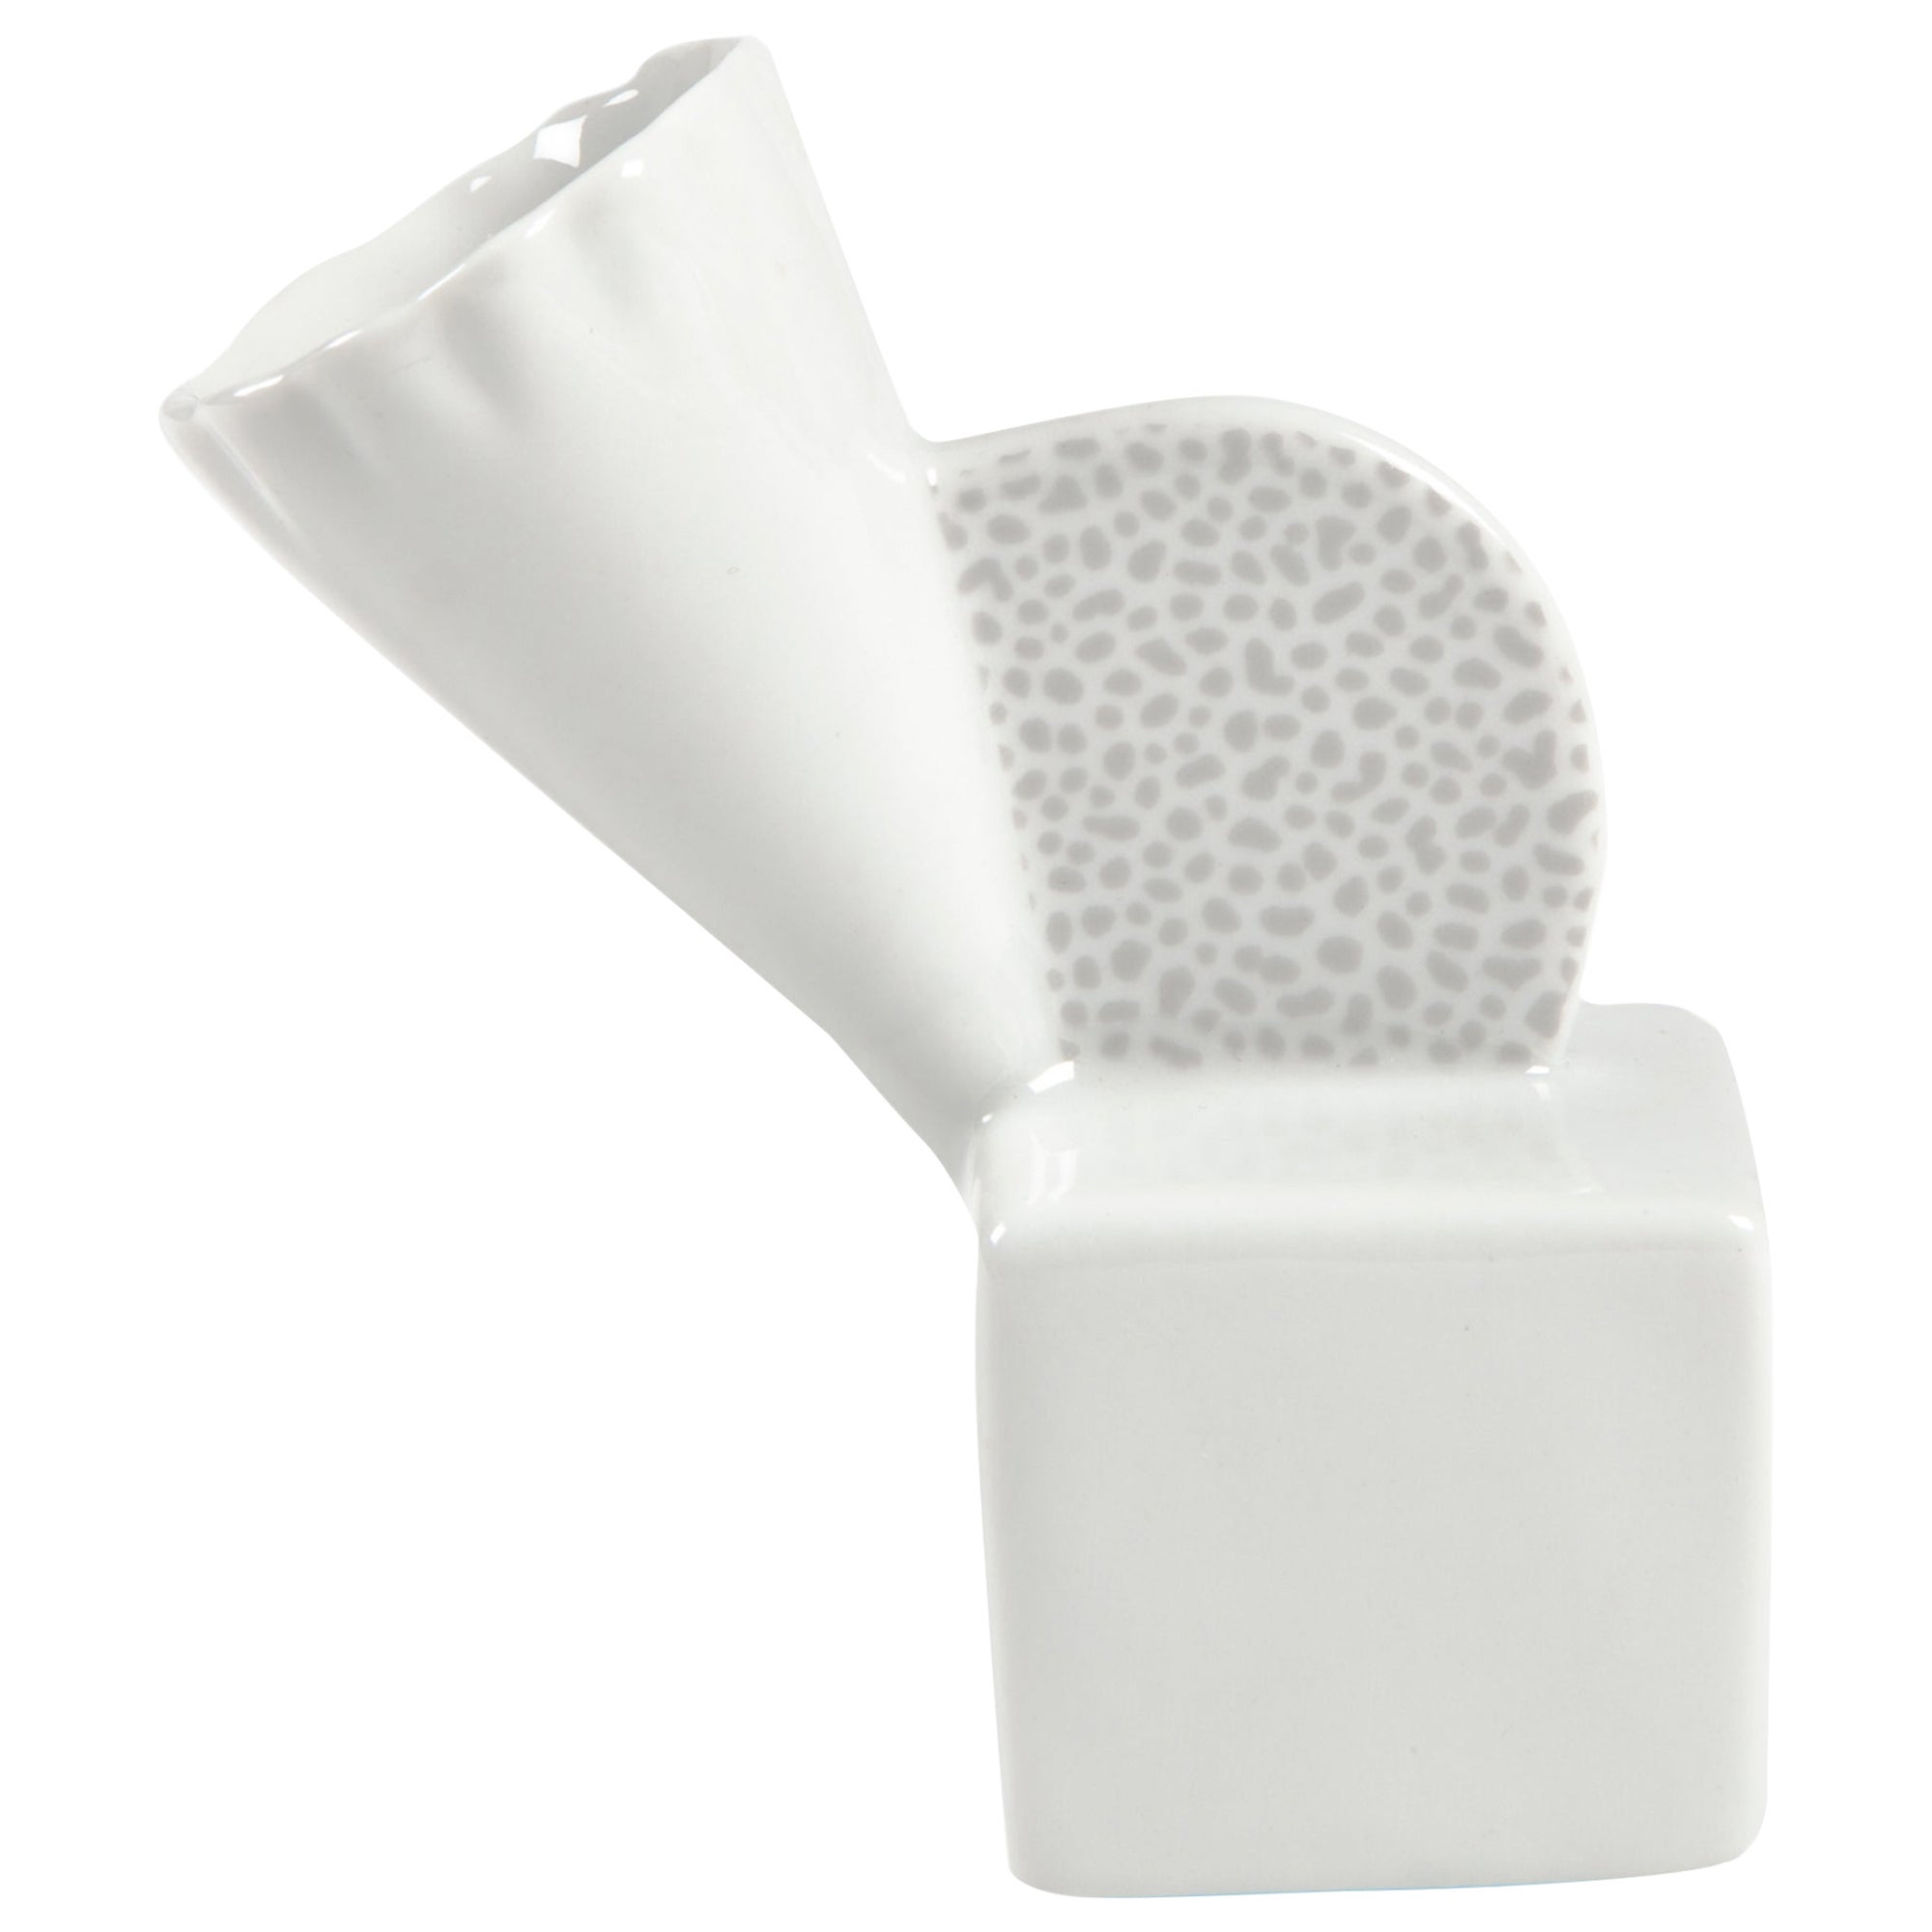 Superior Toothpick Holder in White Porcelain by Matteo Thun for Memphis Milano C